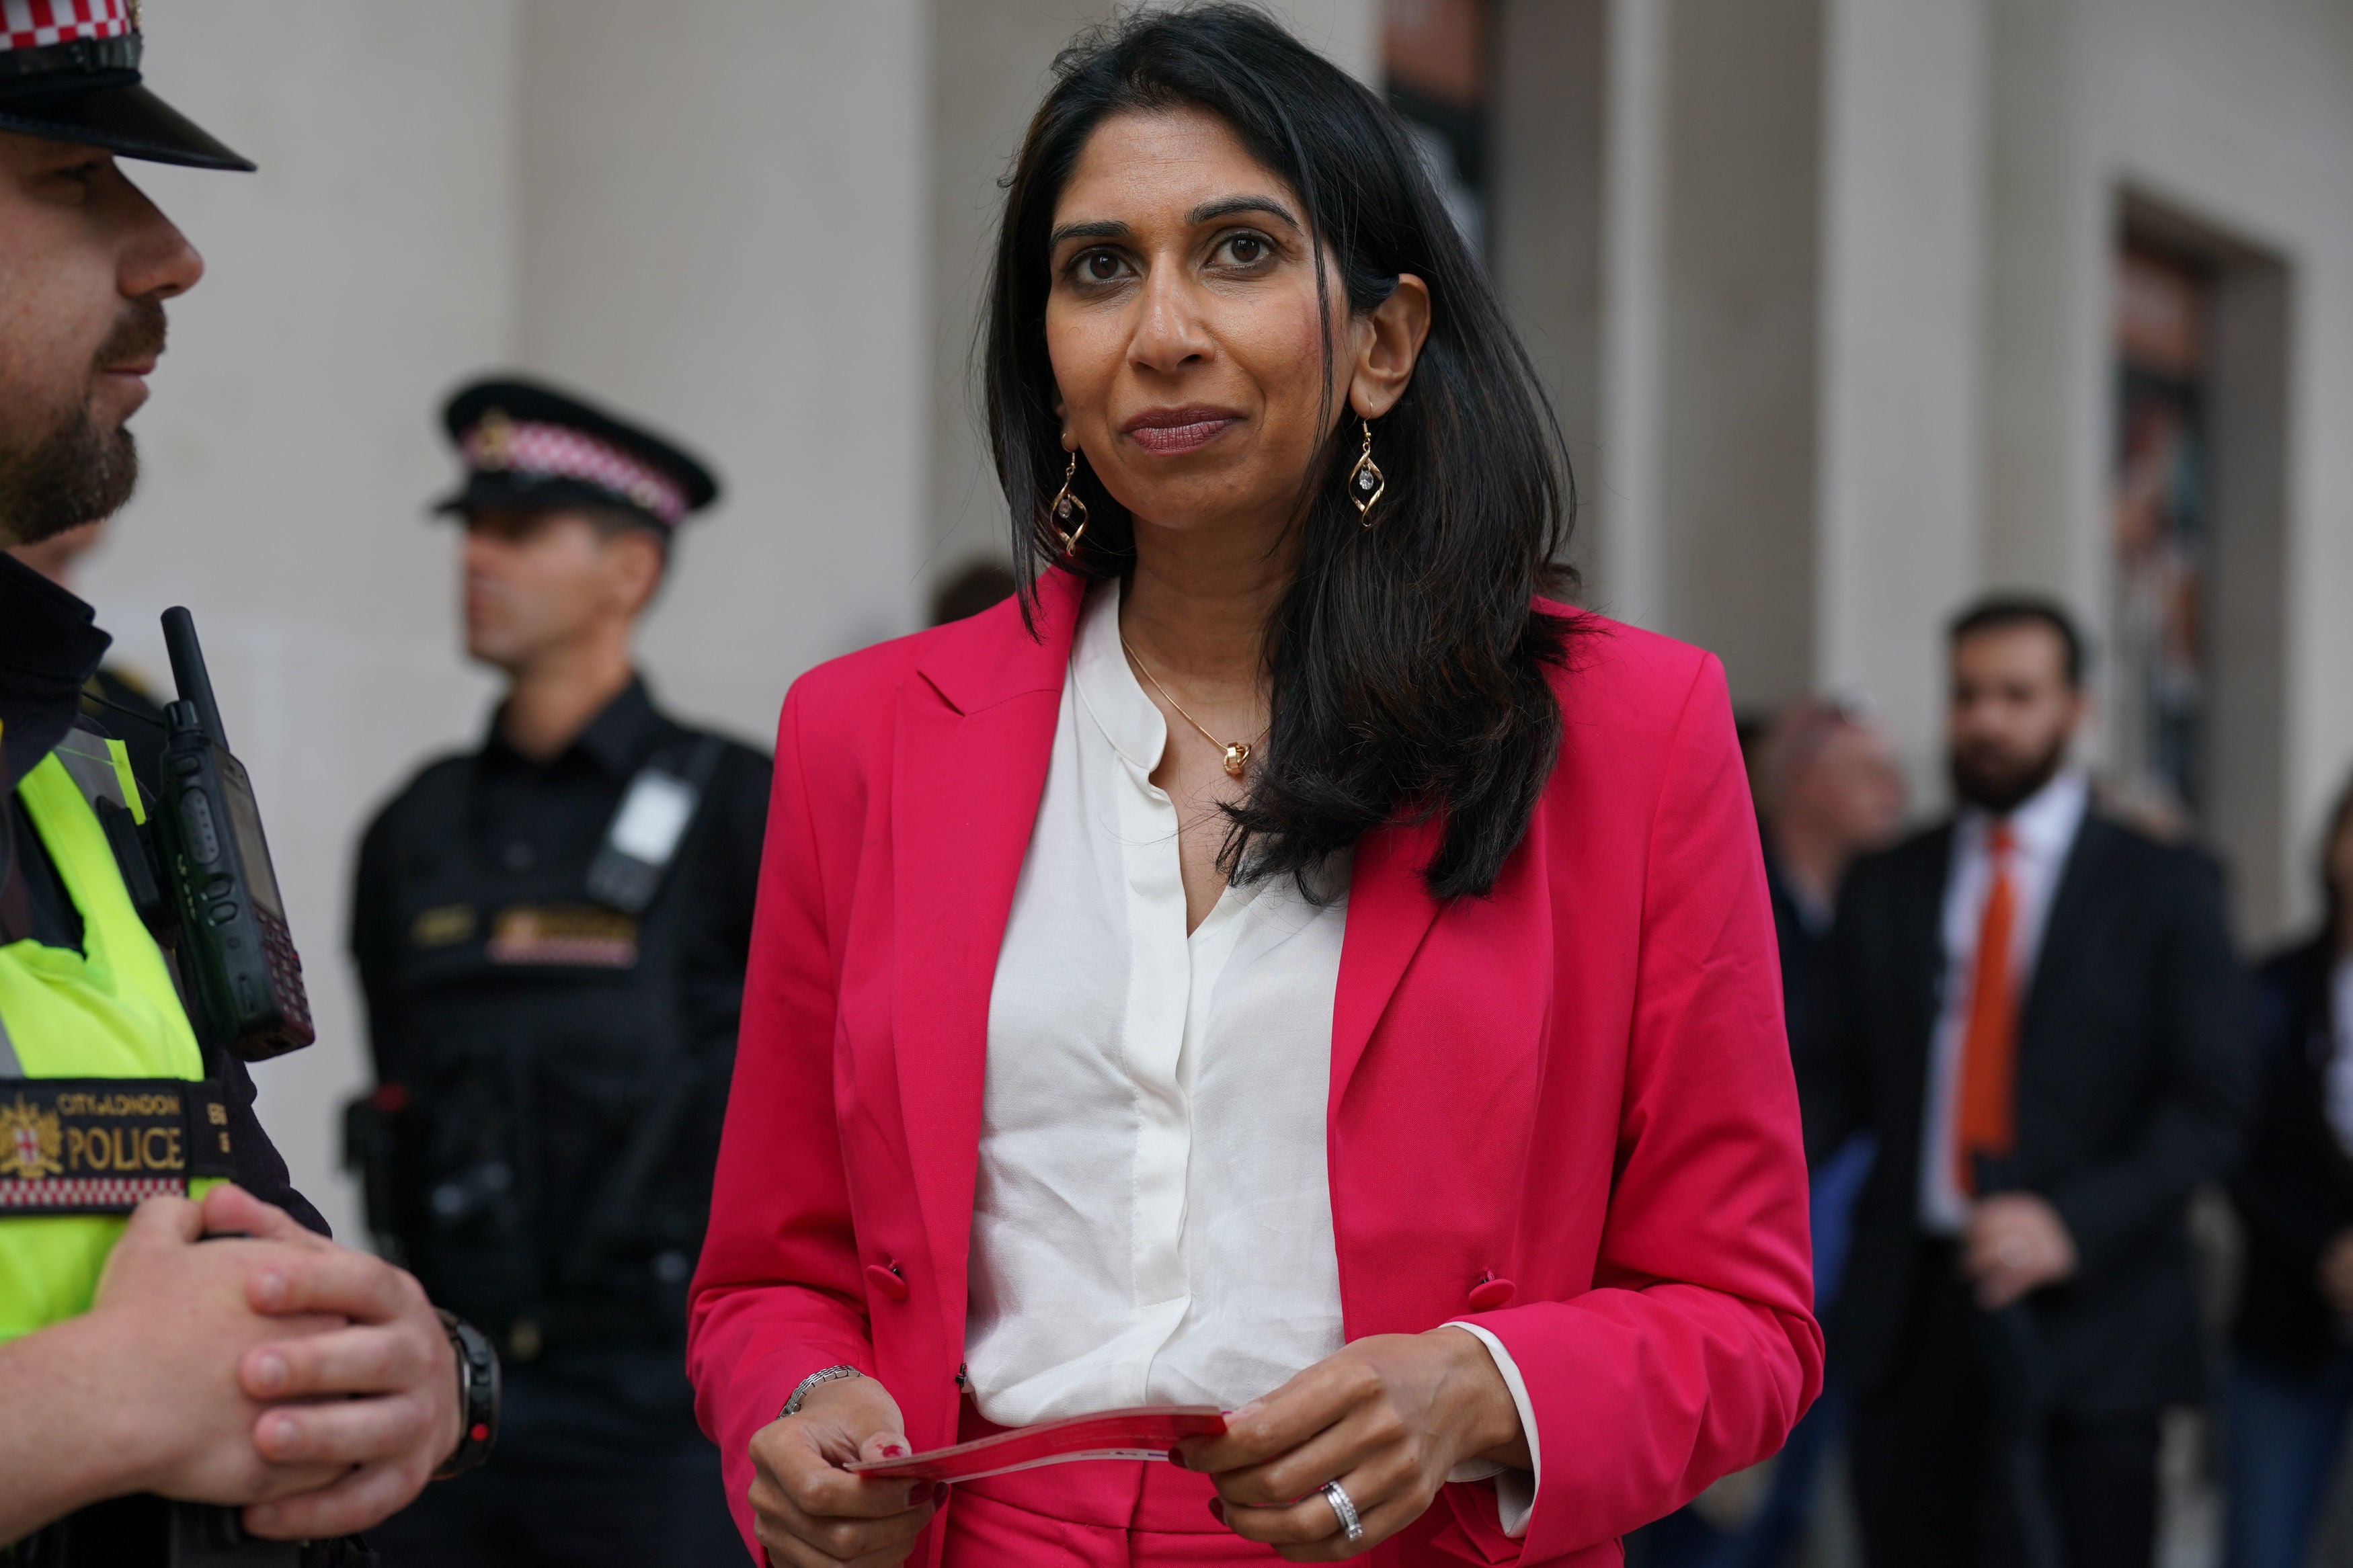 Suella Braverman ran into trouble repeating the claim that the Conservatives have recruited 20,000 more police officers